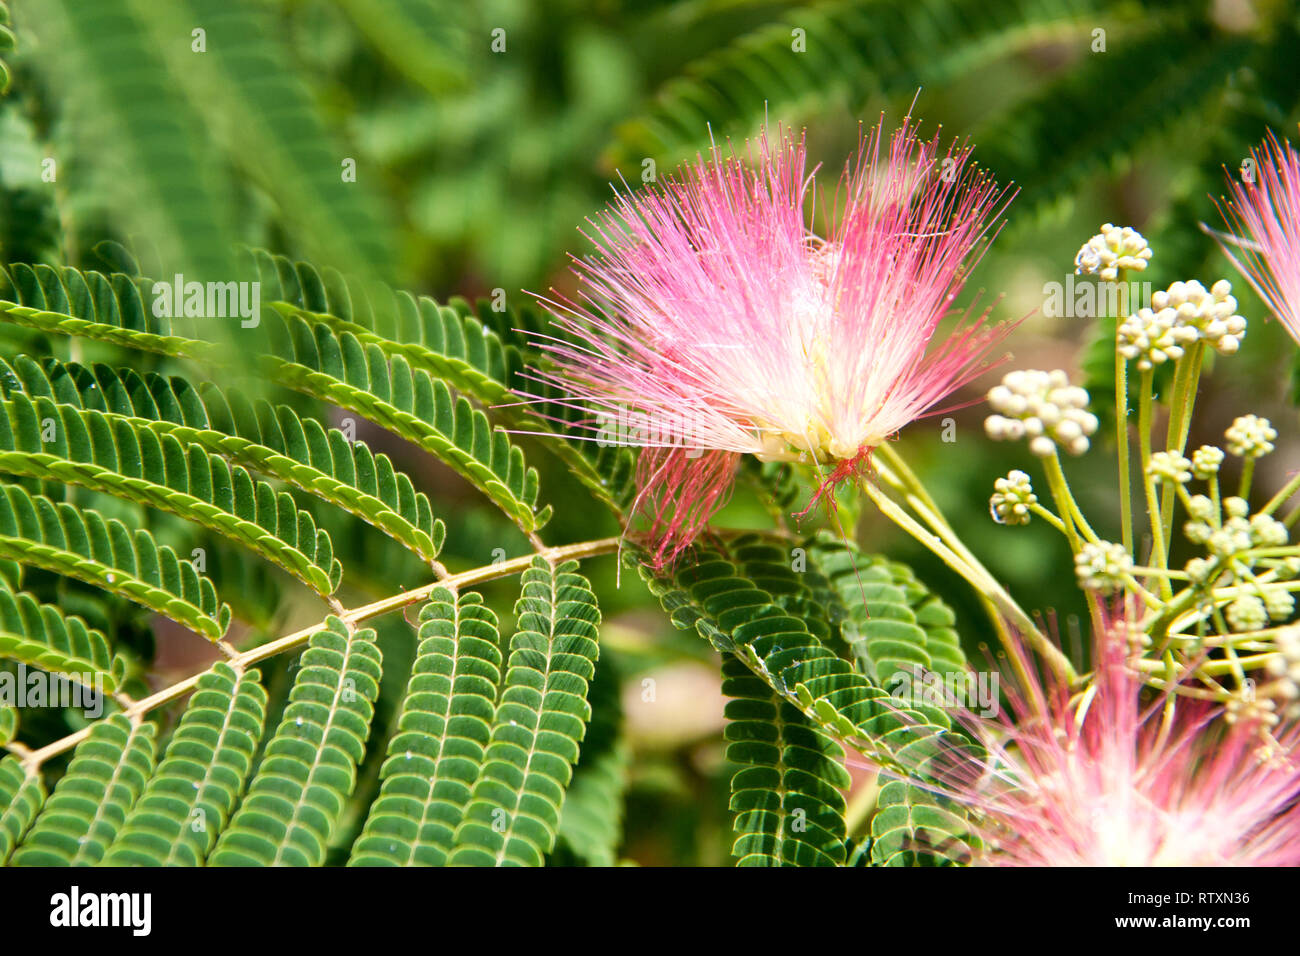 Albizia julibrissin flowers close-up as a background Stock Photo